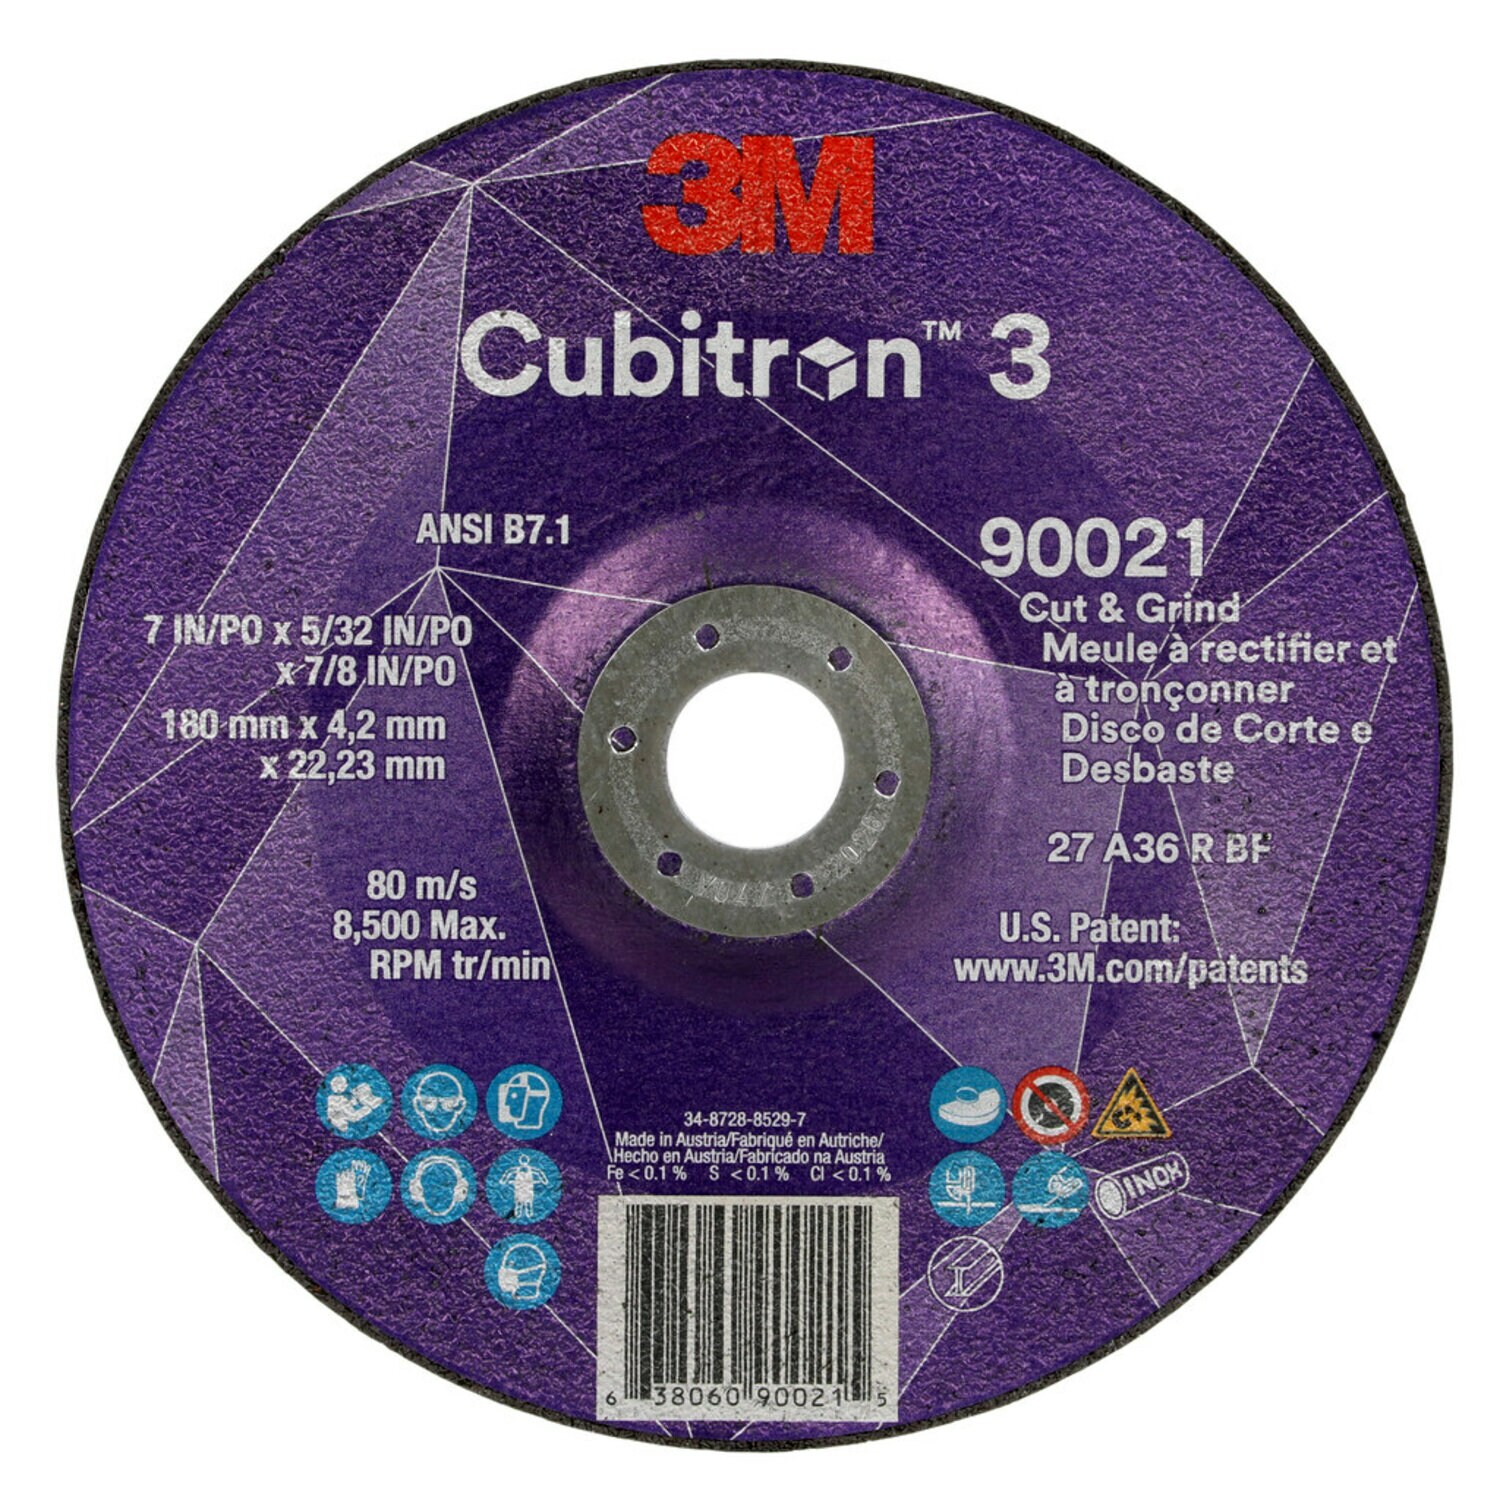 7100313206 - 3M Cubitron 3 Cut and Grind Wheel, 90021, 36+, T27, 7 in x 5/32 in x
7/8 in (180 x 4.2 x 22.23 mm), ANSI, 10/Pack, 20 ea/Case